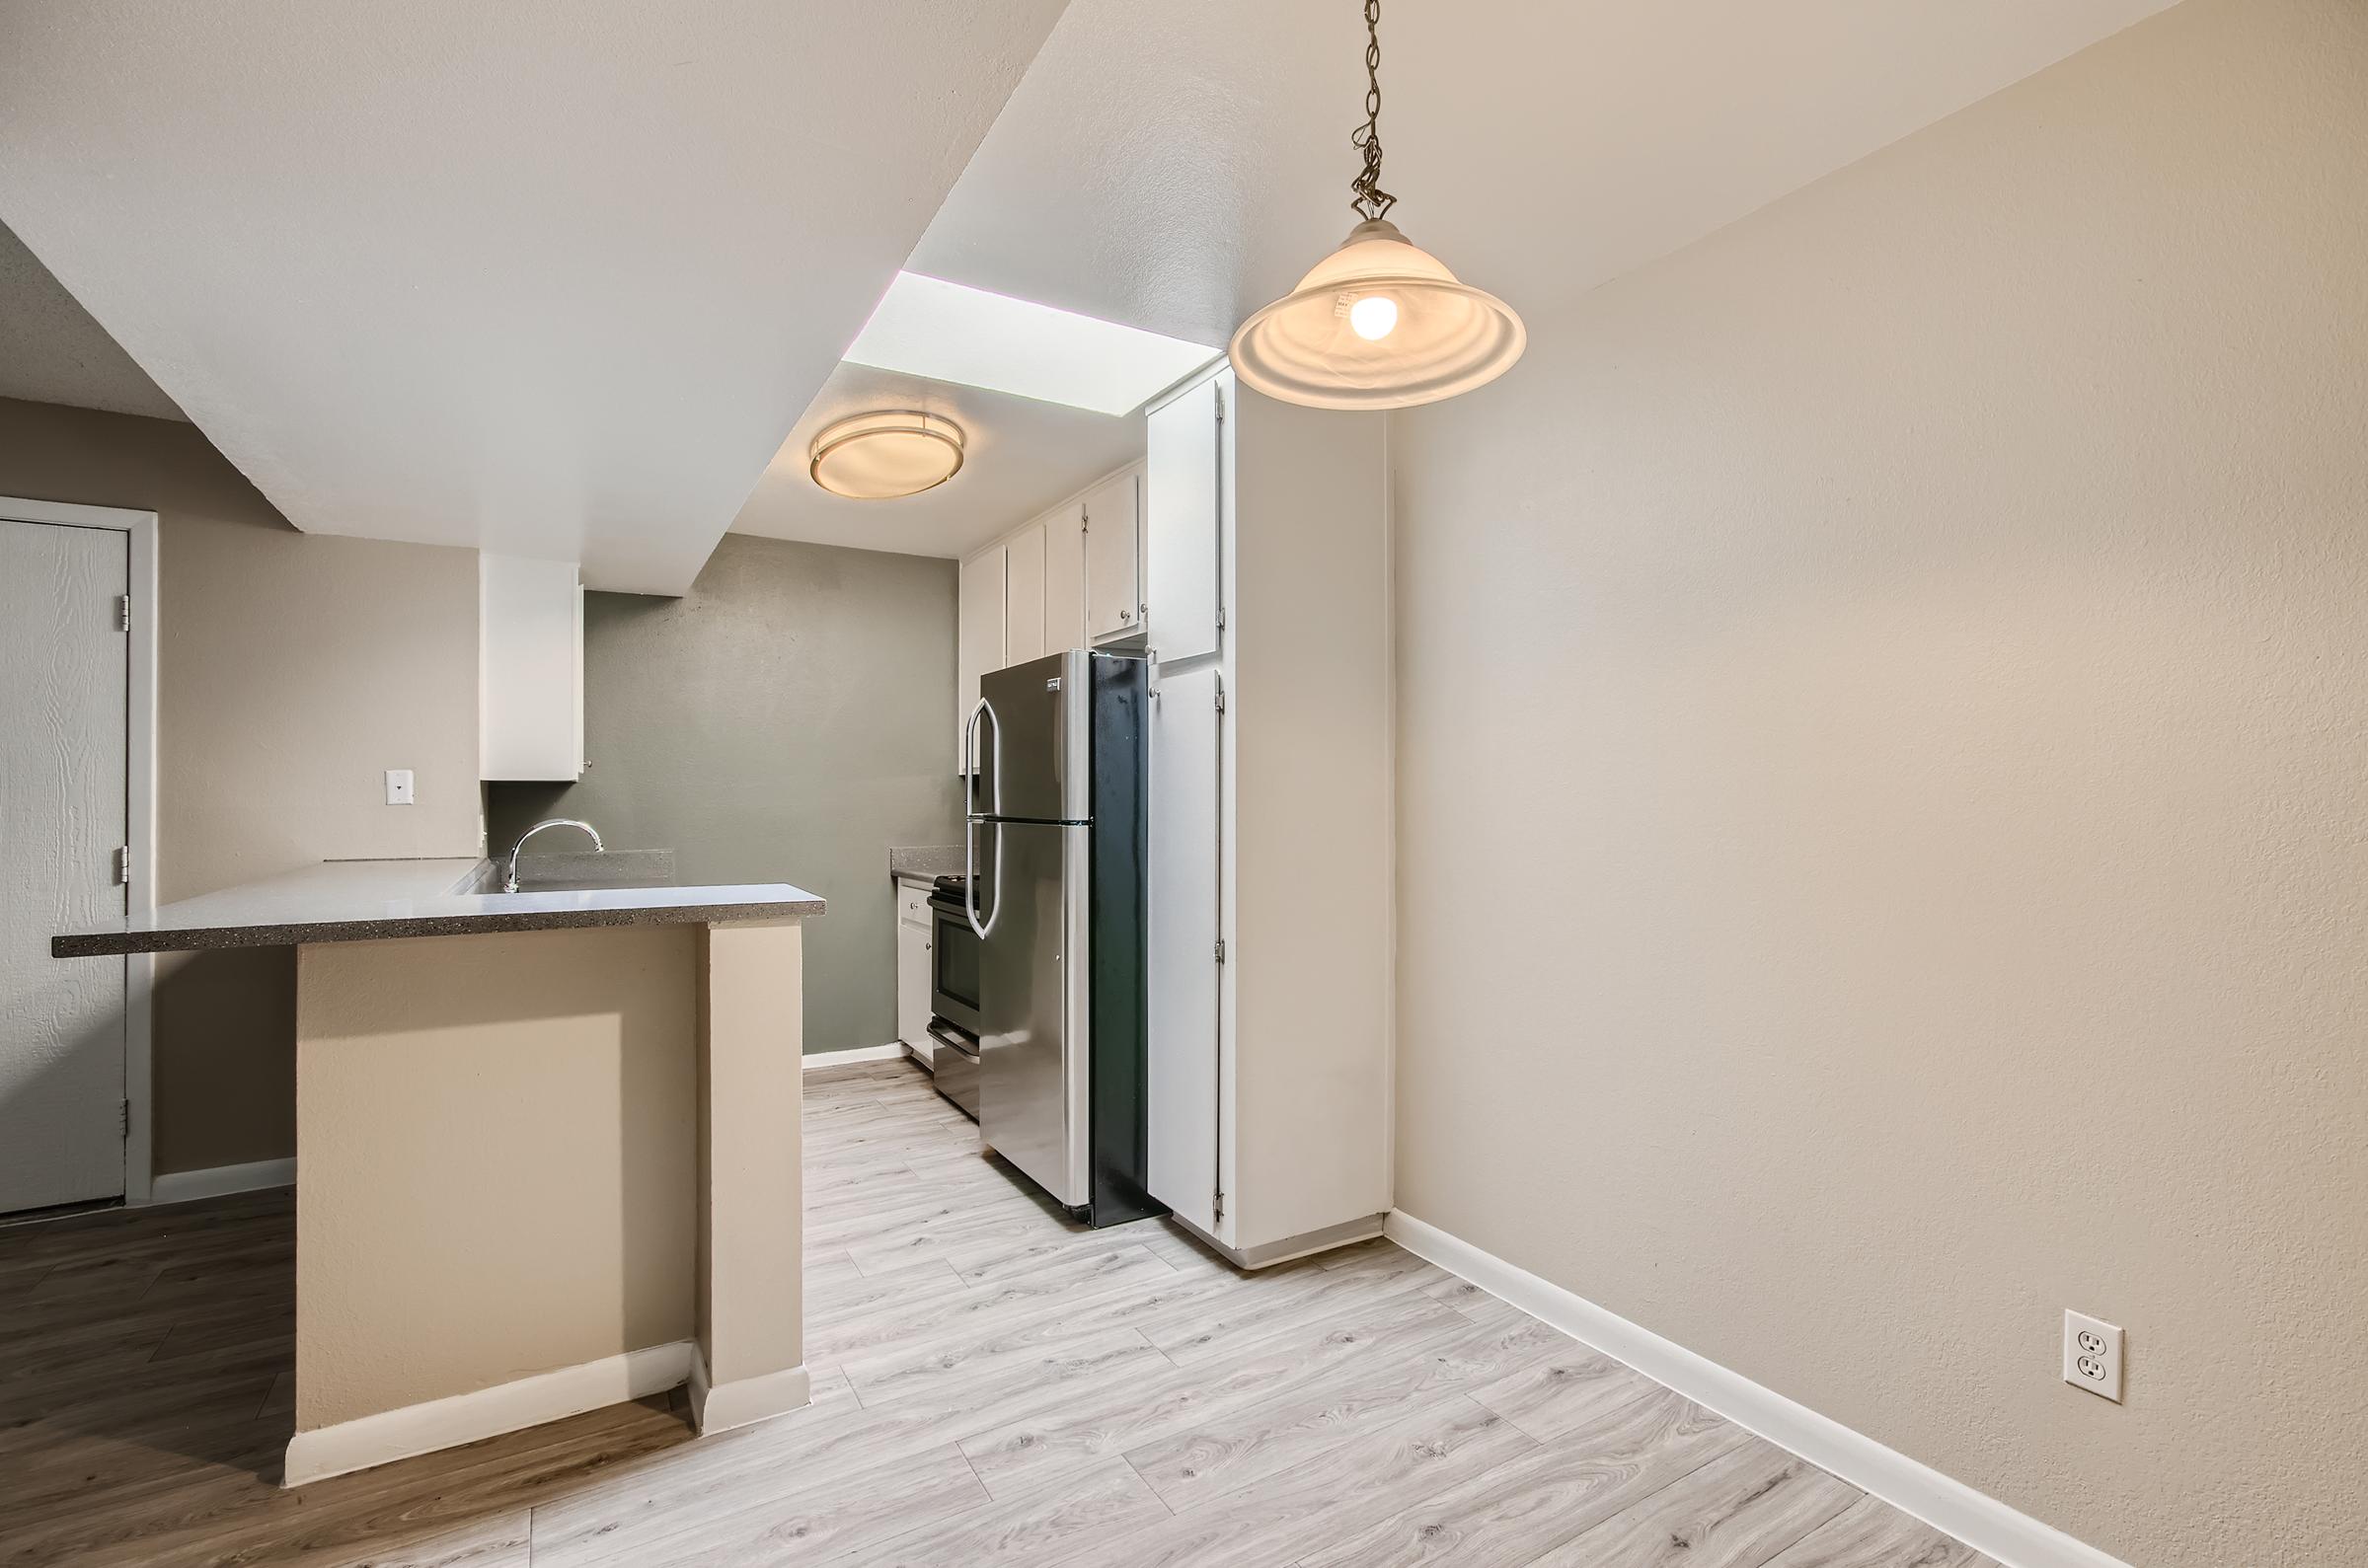 An apartment kitchen and dining area with hanging lighting and wood-style flooring at Rise on McClintock.